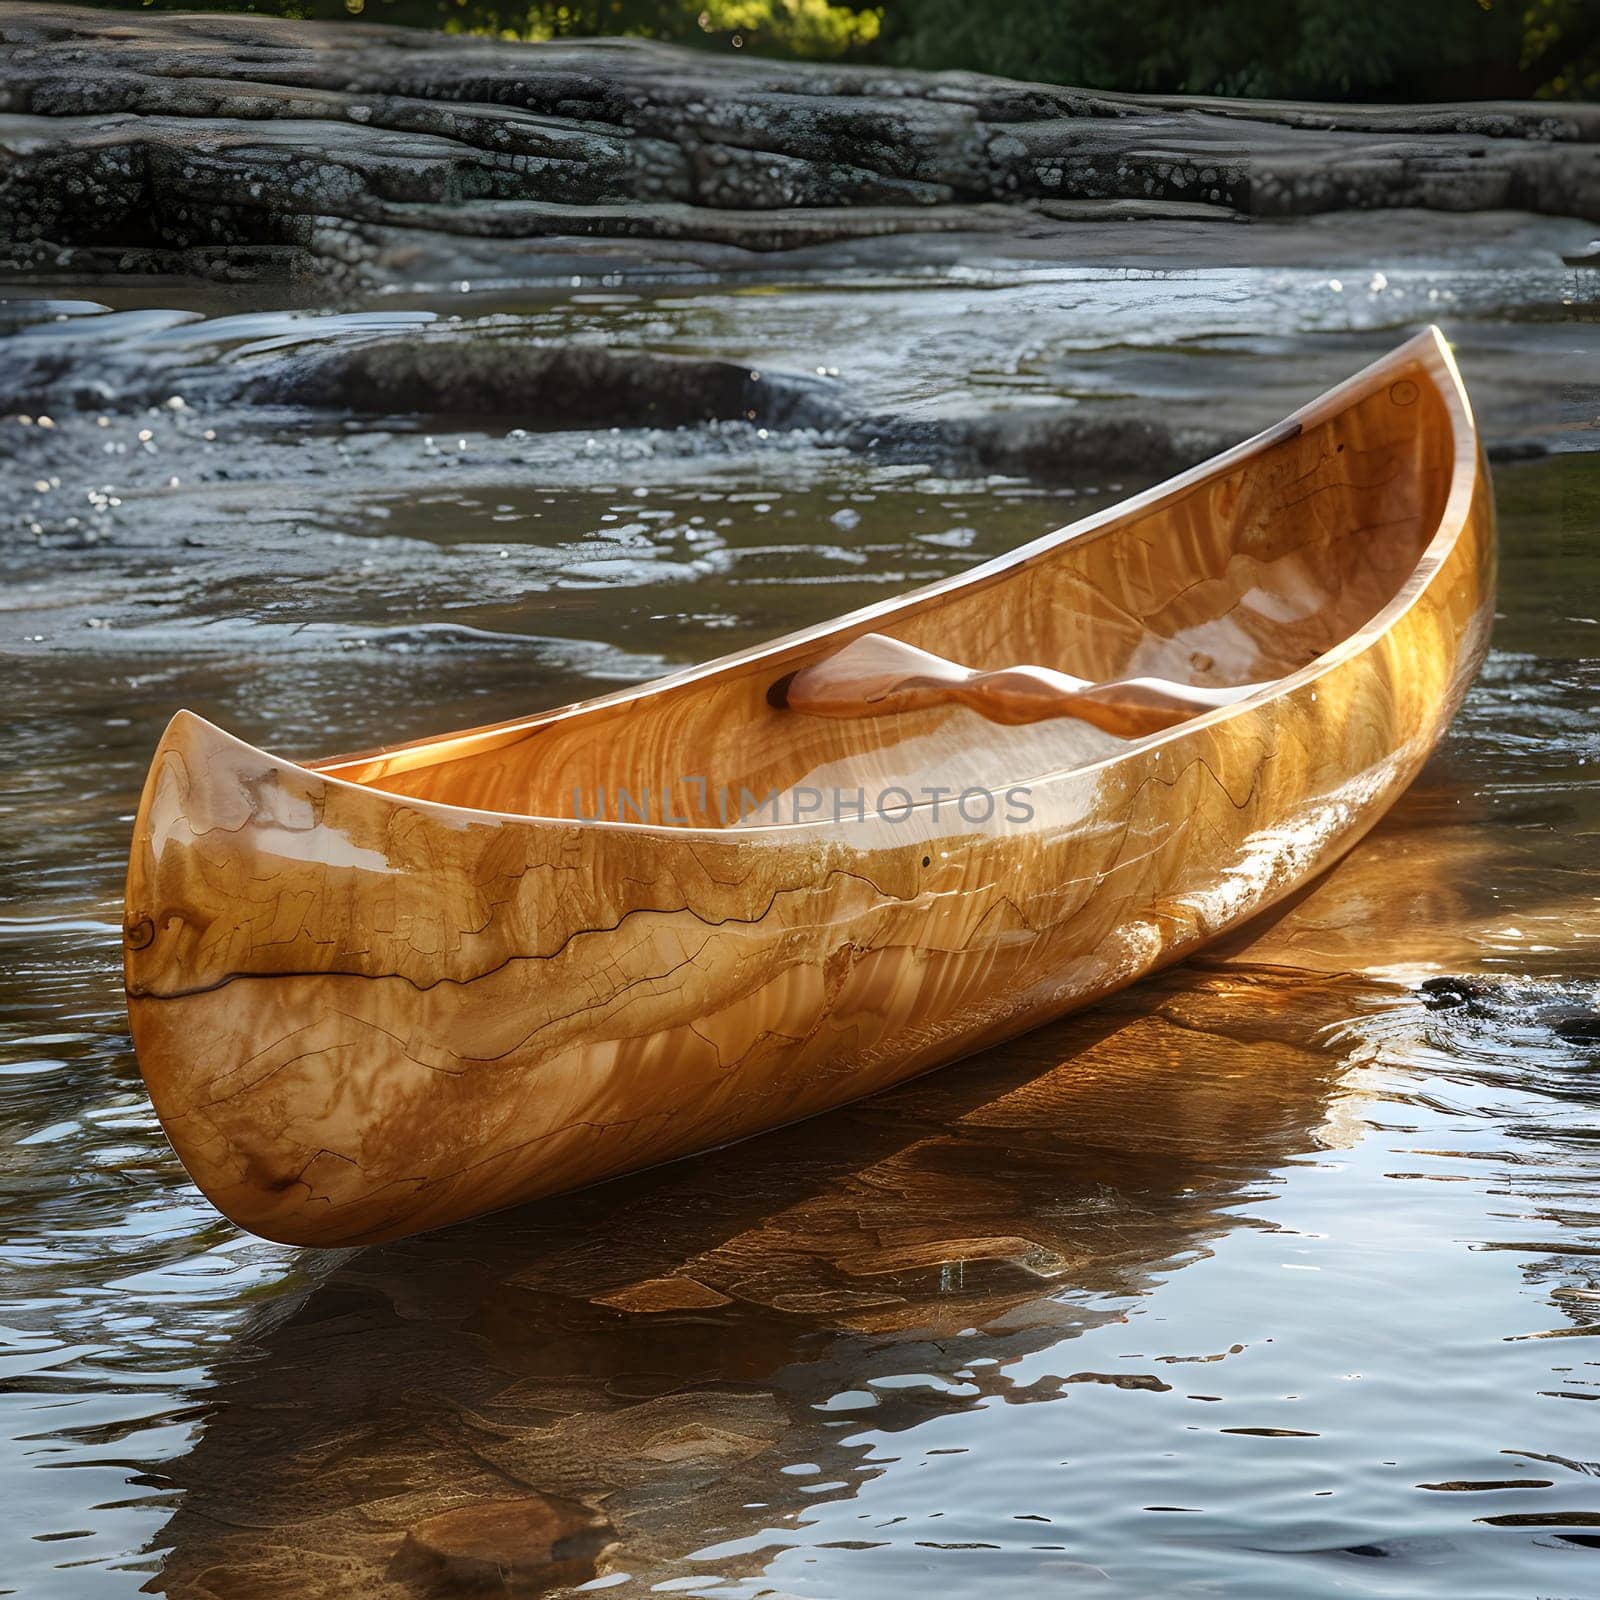 A wooden canoe gracefully glides across the tranquil surface of a serene lake, blending in with the surrounding tall trees and lush green plants